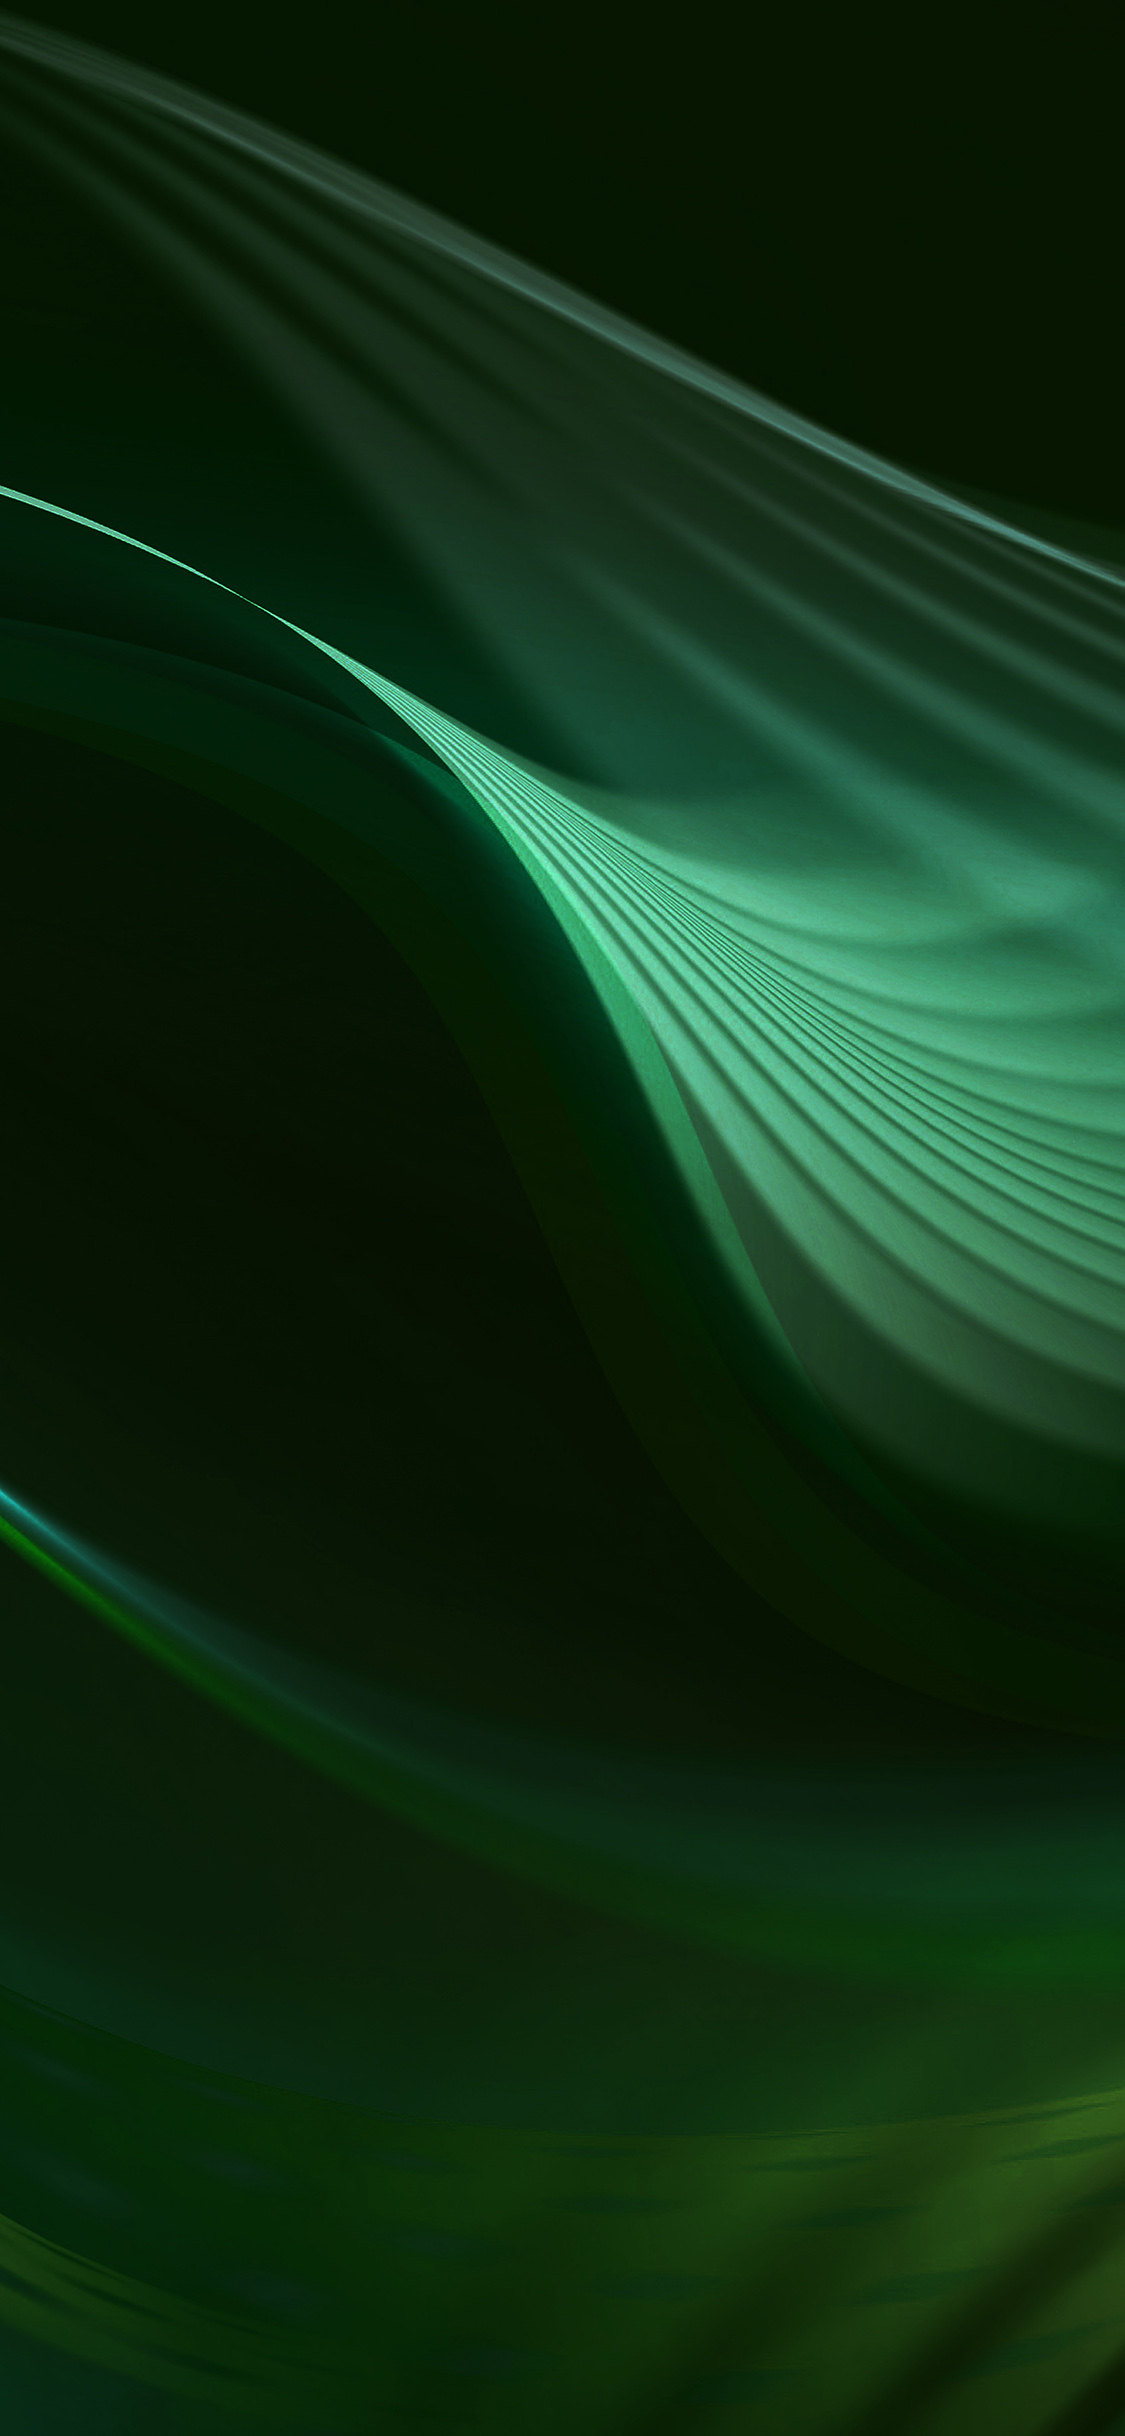 iPhone X wallpaper. wave abstract green pattern